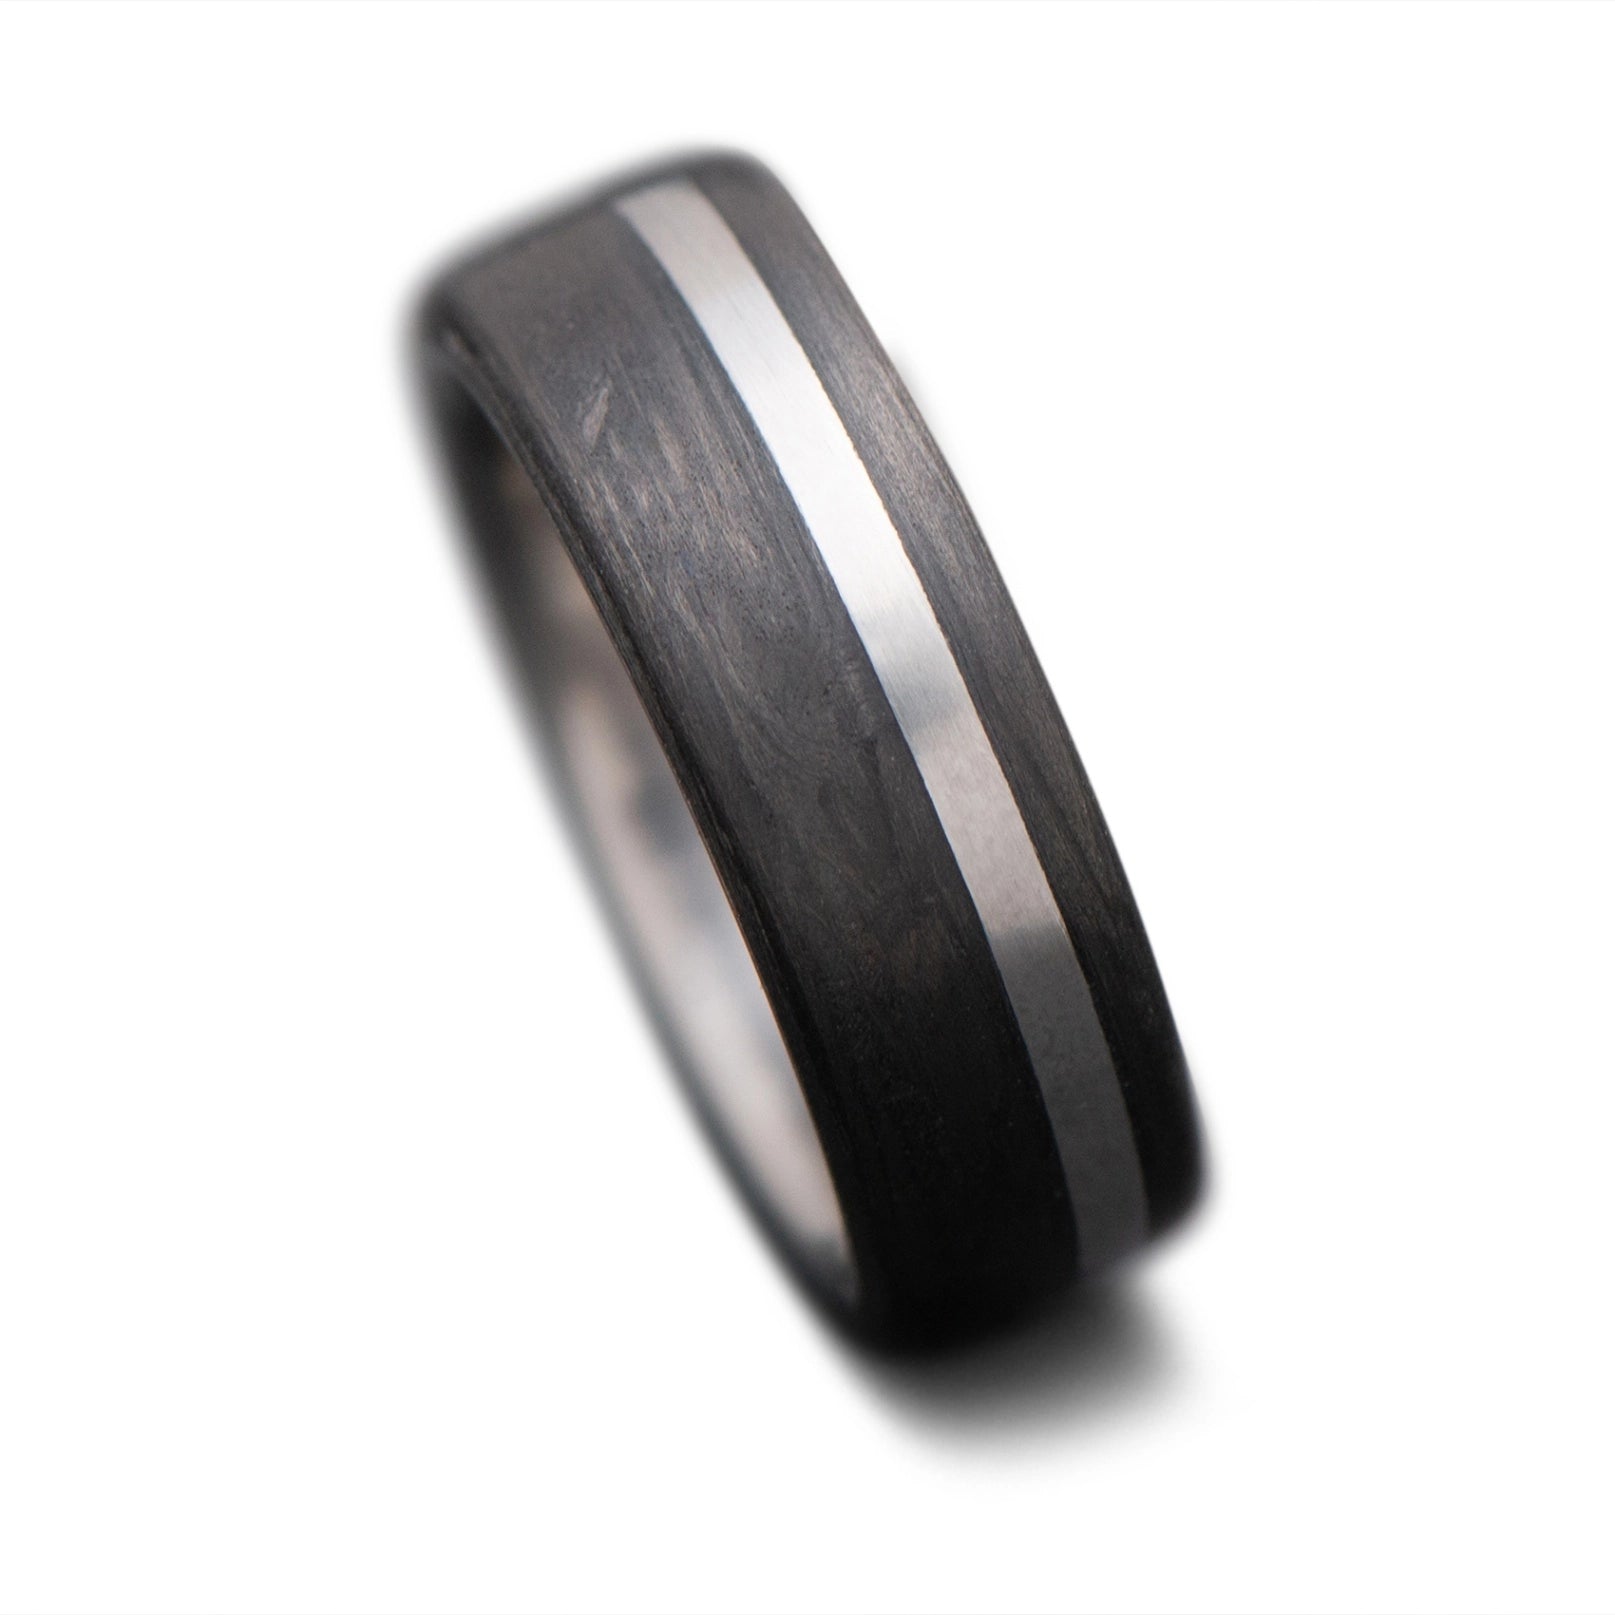 CarbonUni Core Ring with Titanium inlay and inner sleeve, 5mm -THE VERTEX